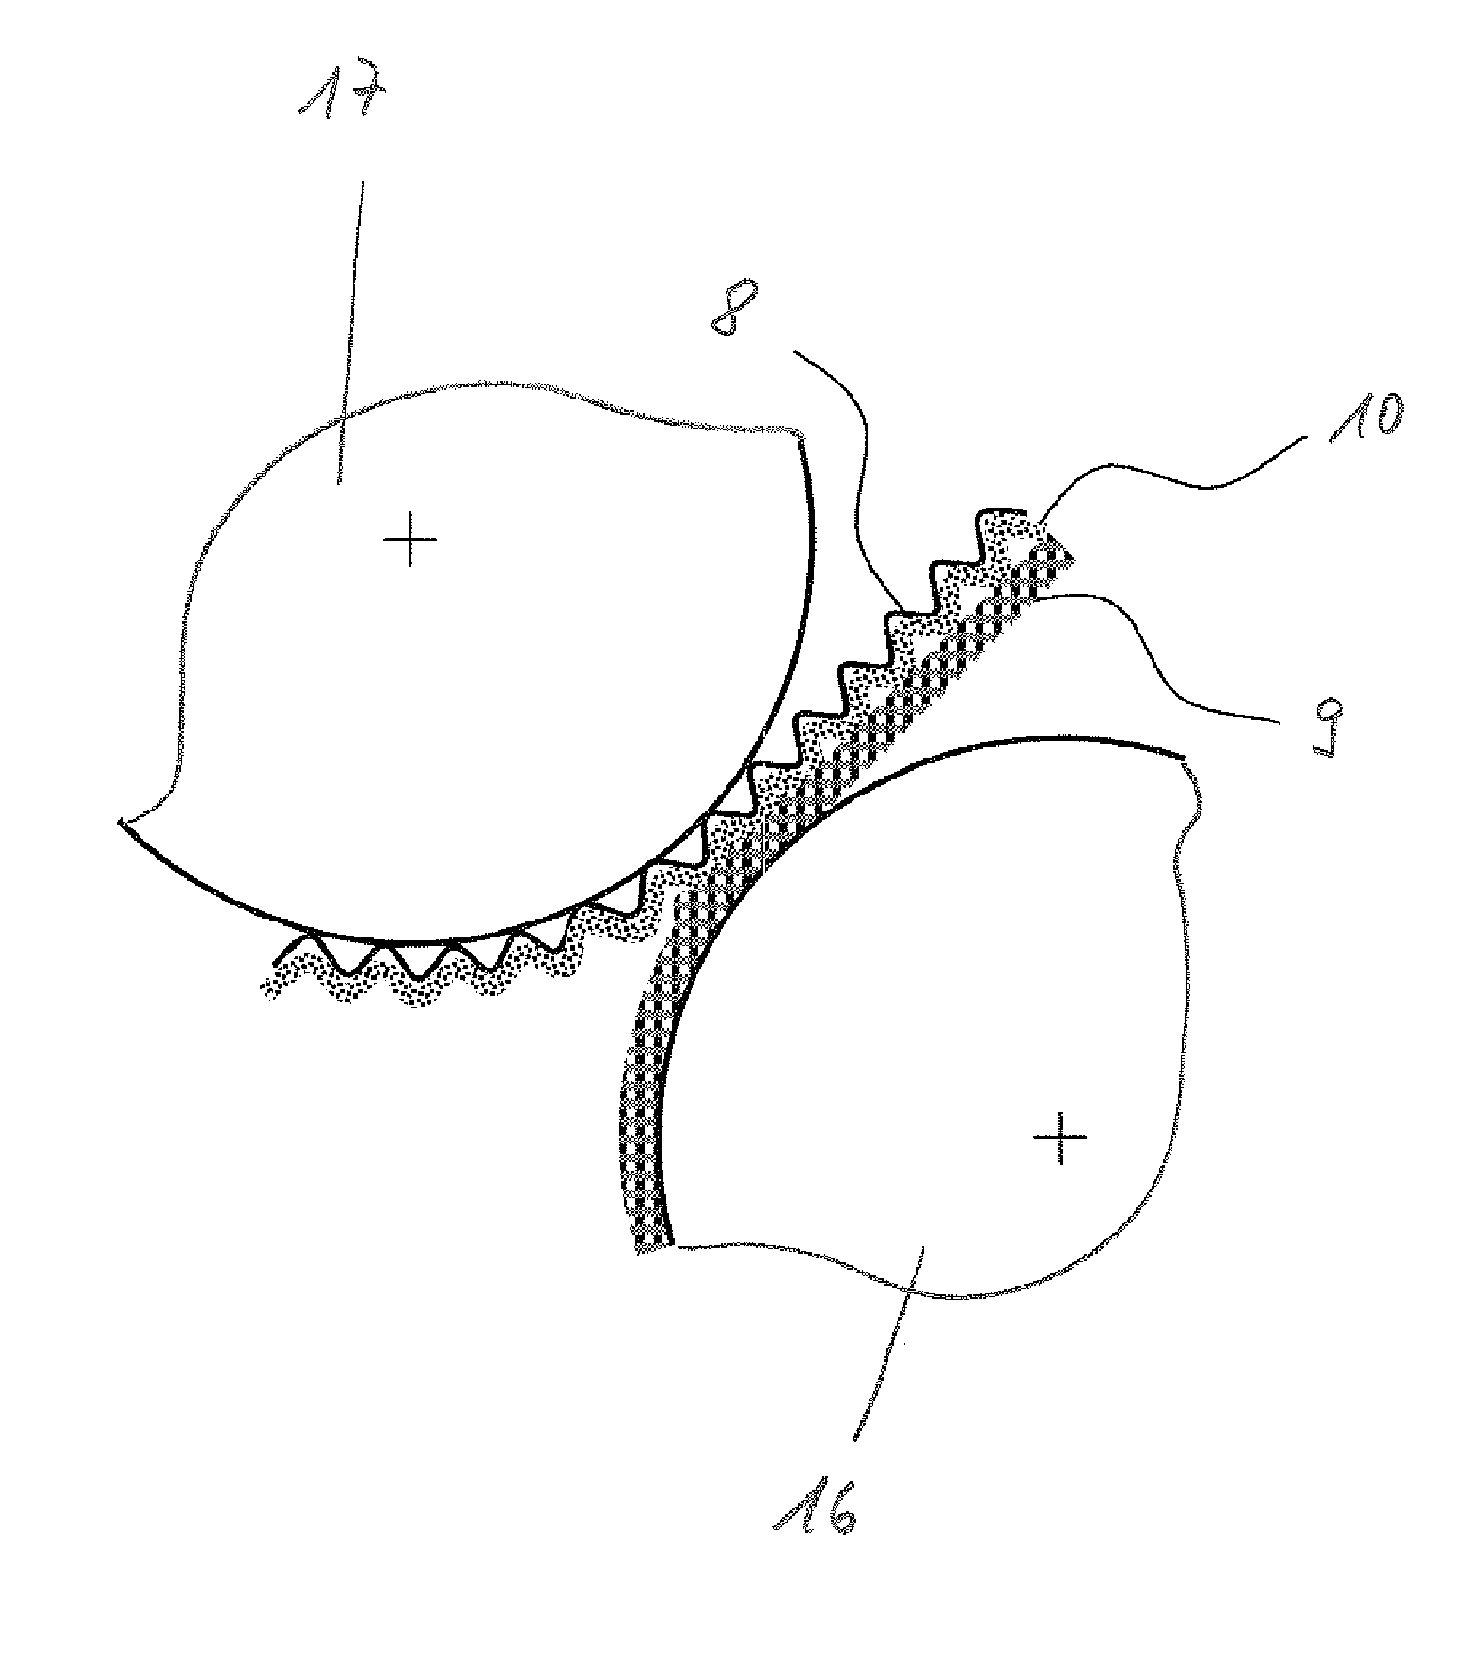 Device and method for producing a material web